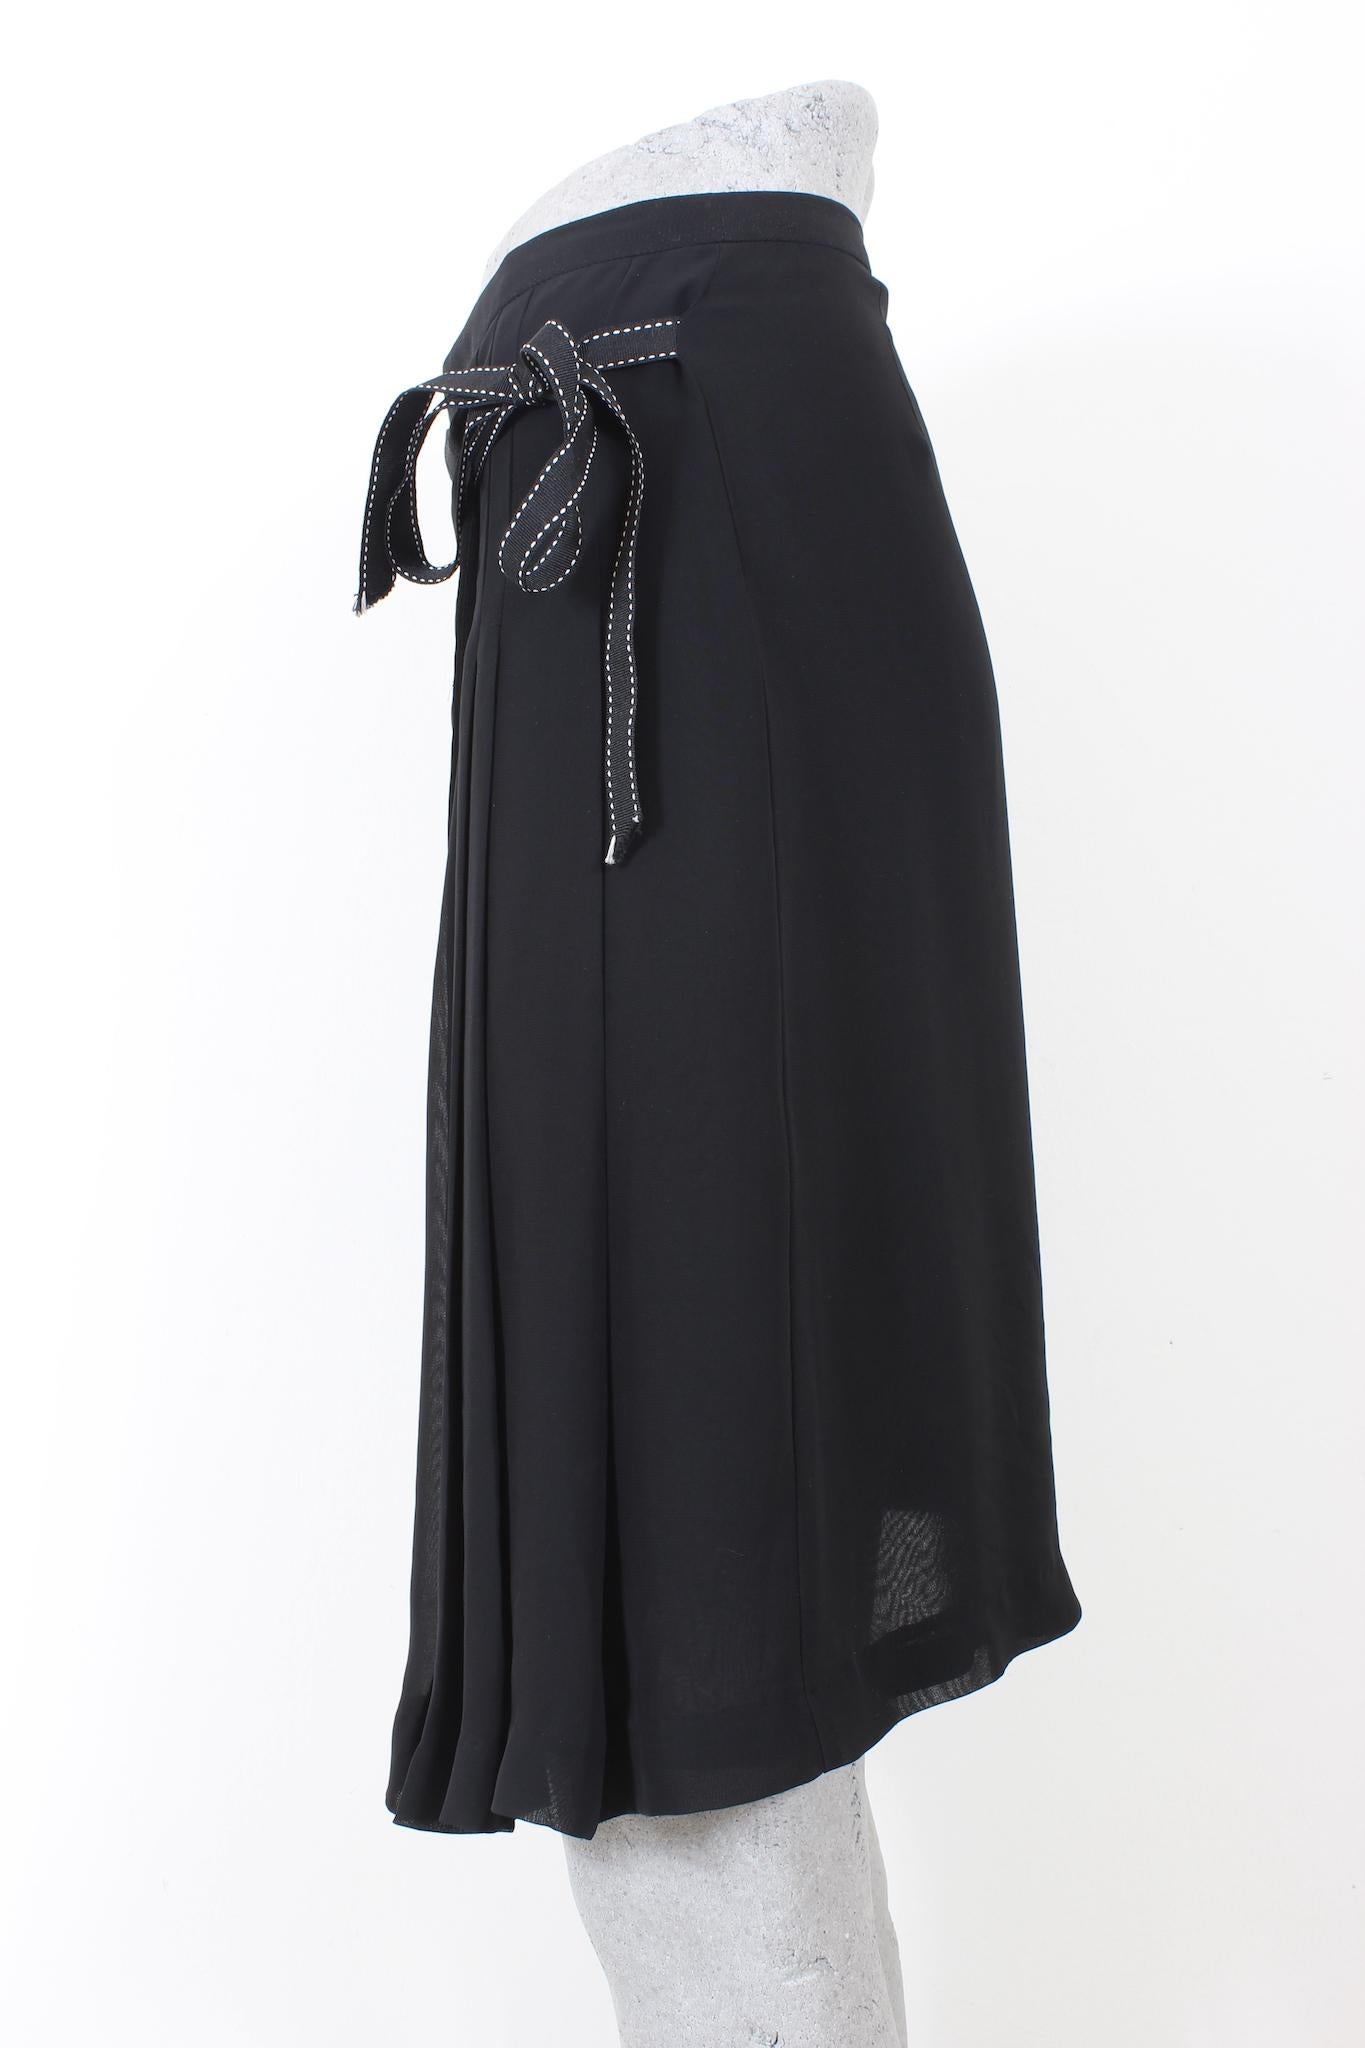 The Max Mara 90s black vintage pleated skirt model wraparound with a chic bow at the waist for a timeless look. Crafted in luxurious black viscose, this skirt is perfect for a timeless look from day to night.

Size: S

Waist: 33 cm
Lenght: 55 cm